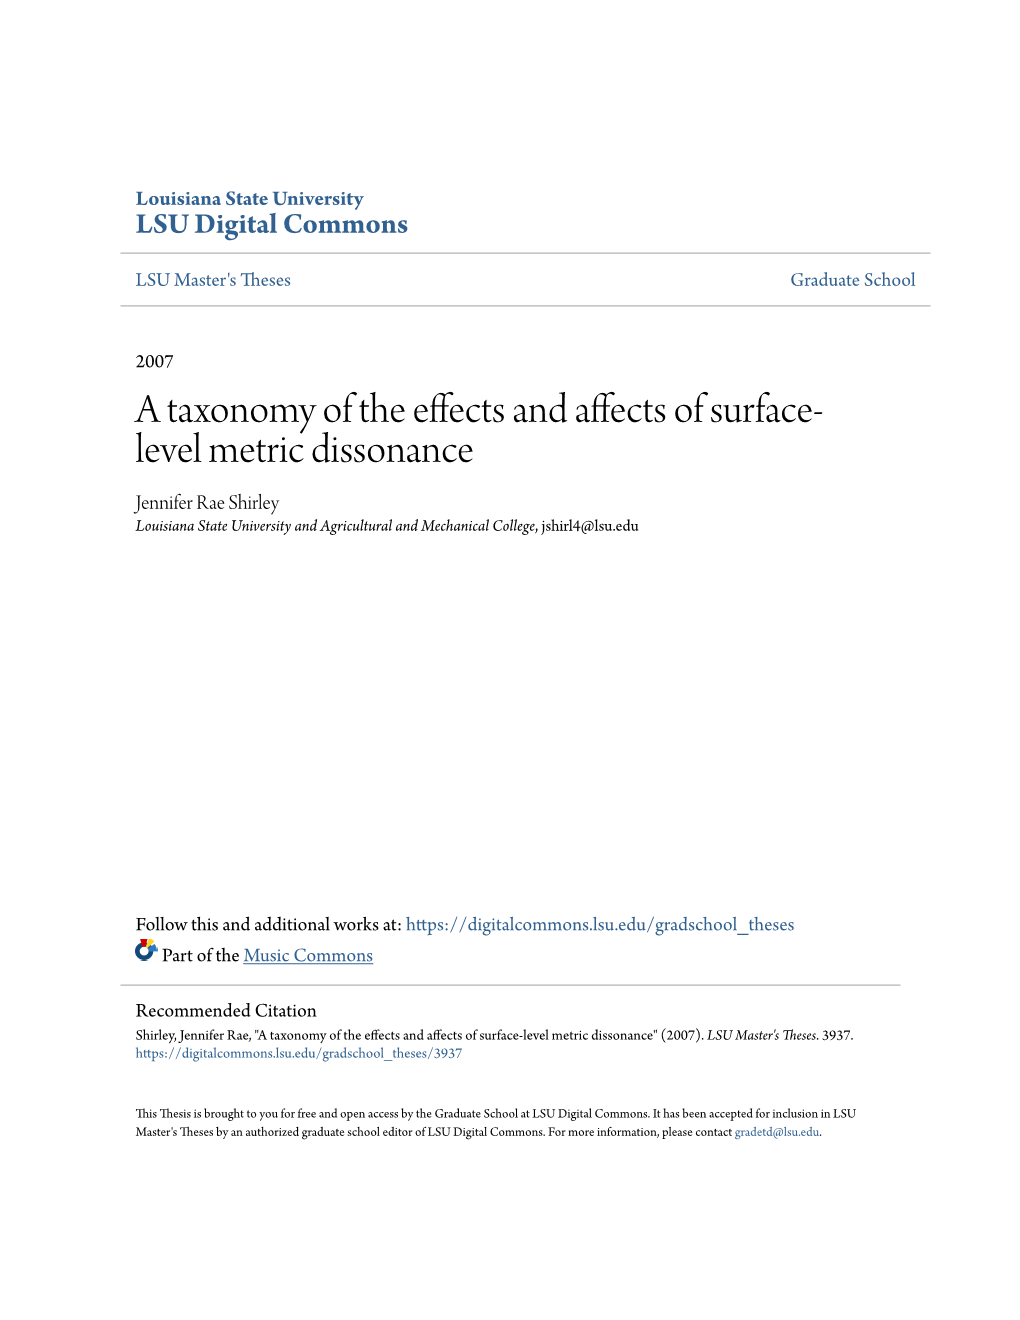 A Taxonomy of the Effects and Affects of Surface-Level Metric Dissonance" (2007)